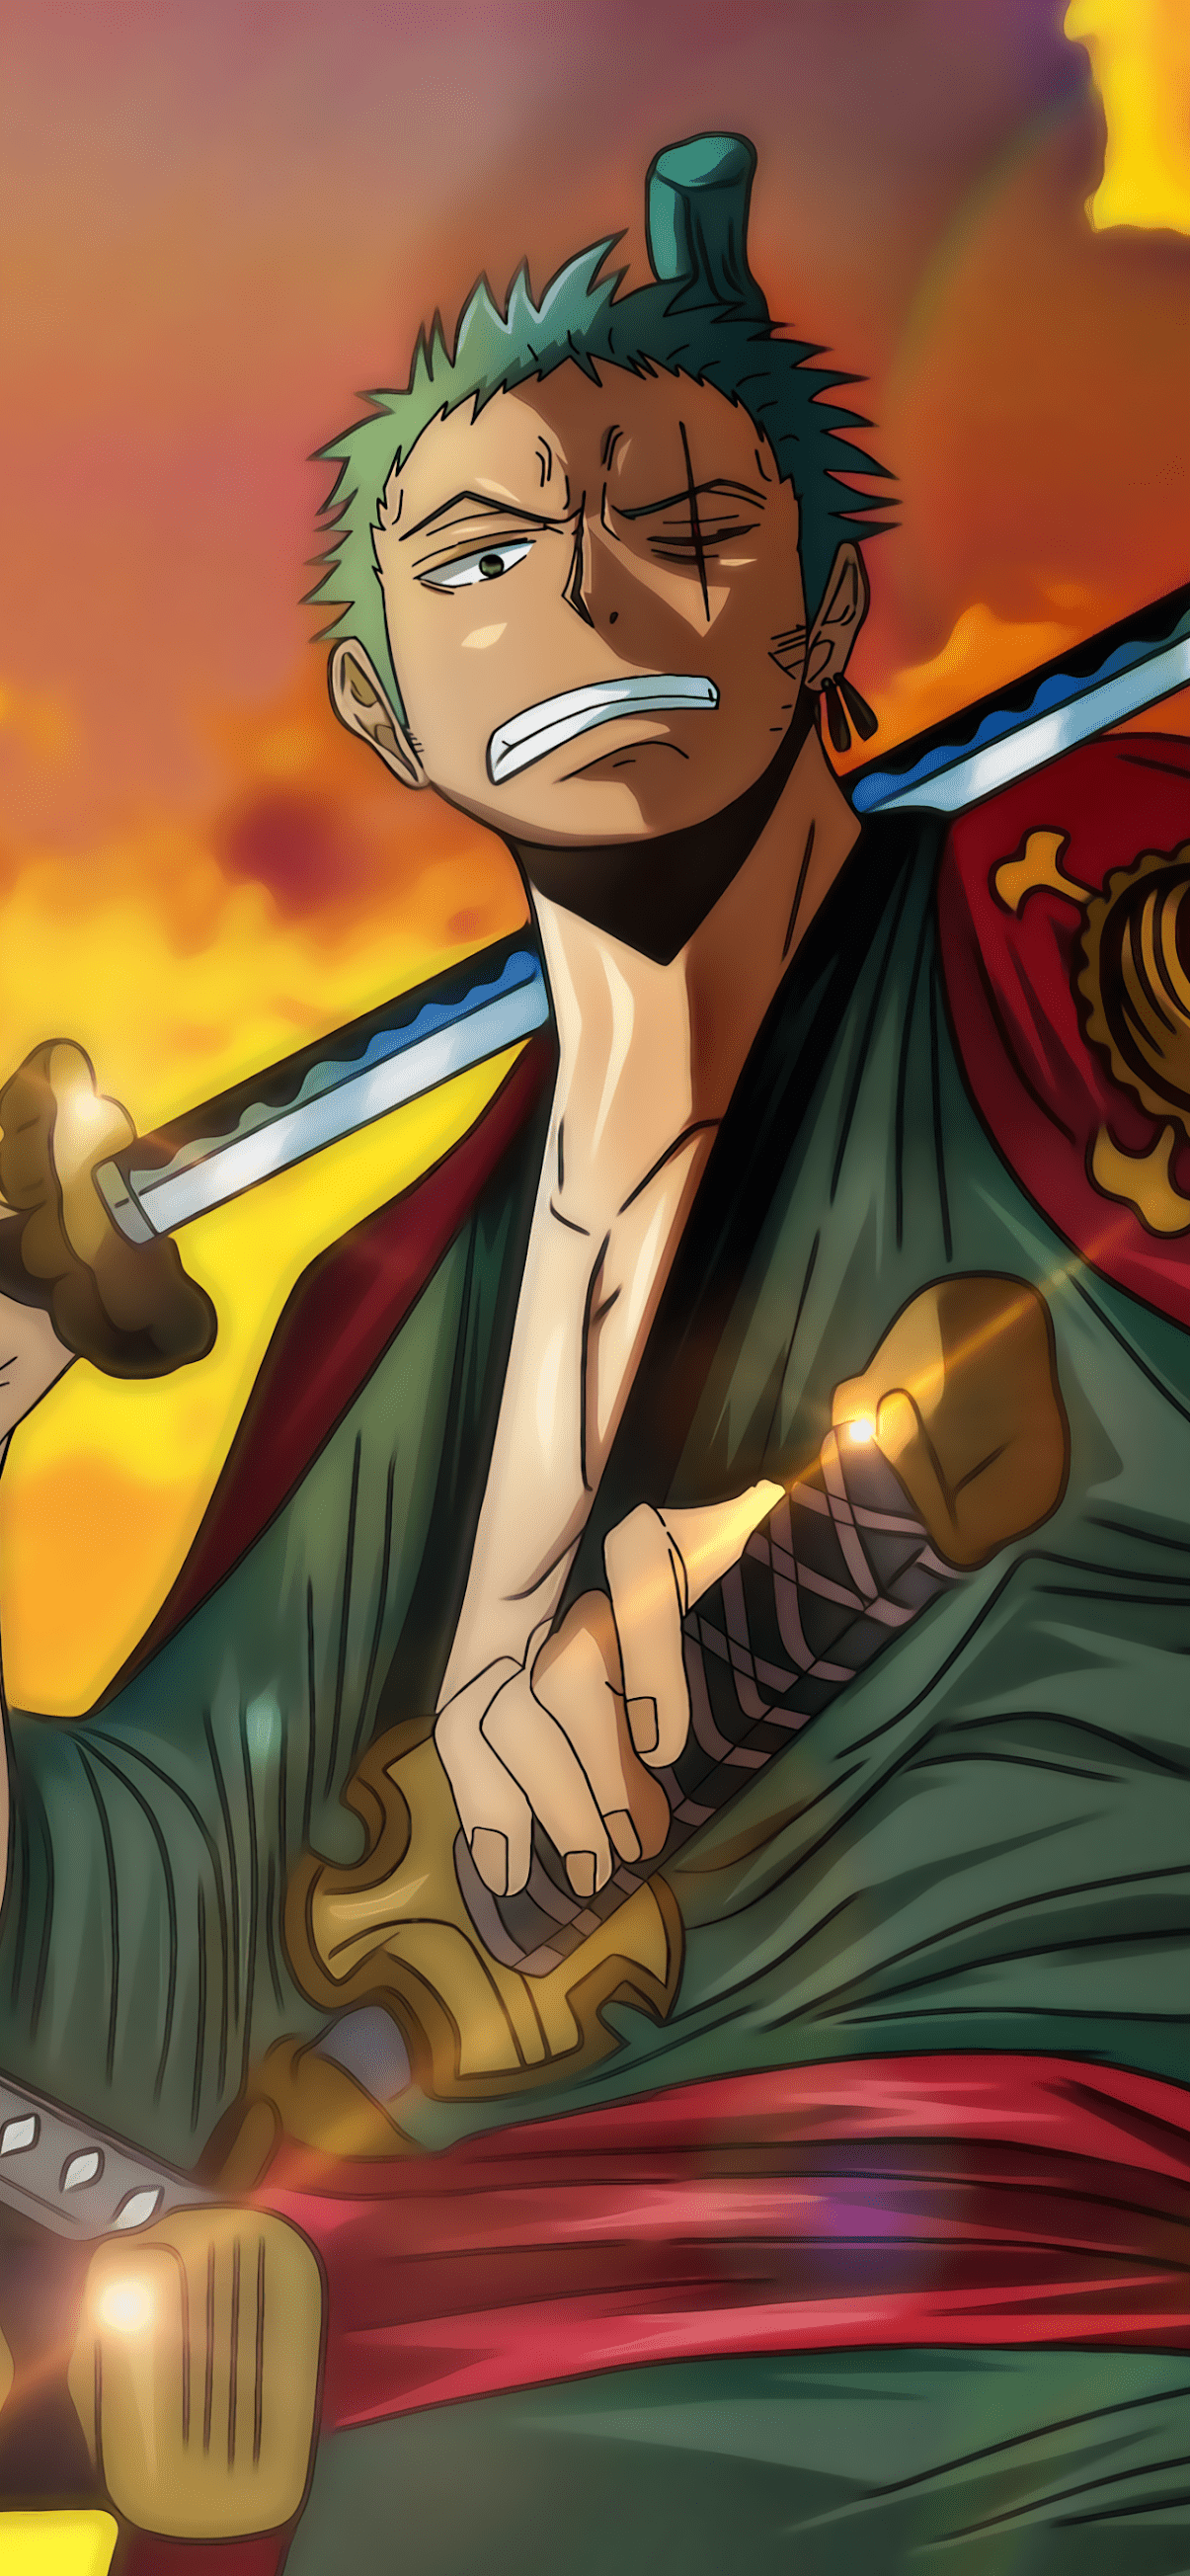 Roronoa Zoro, one of the Straw Hat Pirates, holding his swords with a sunset in the background - One Piece